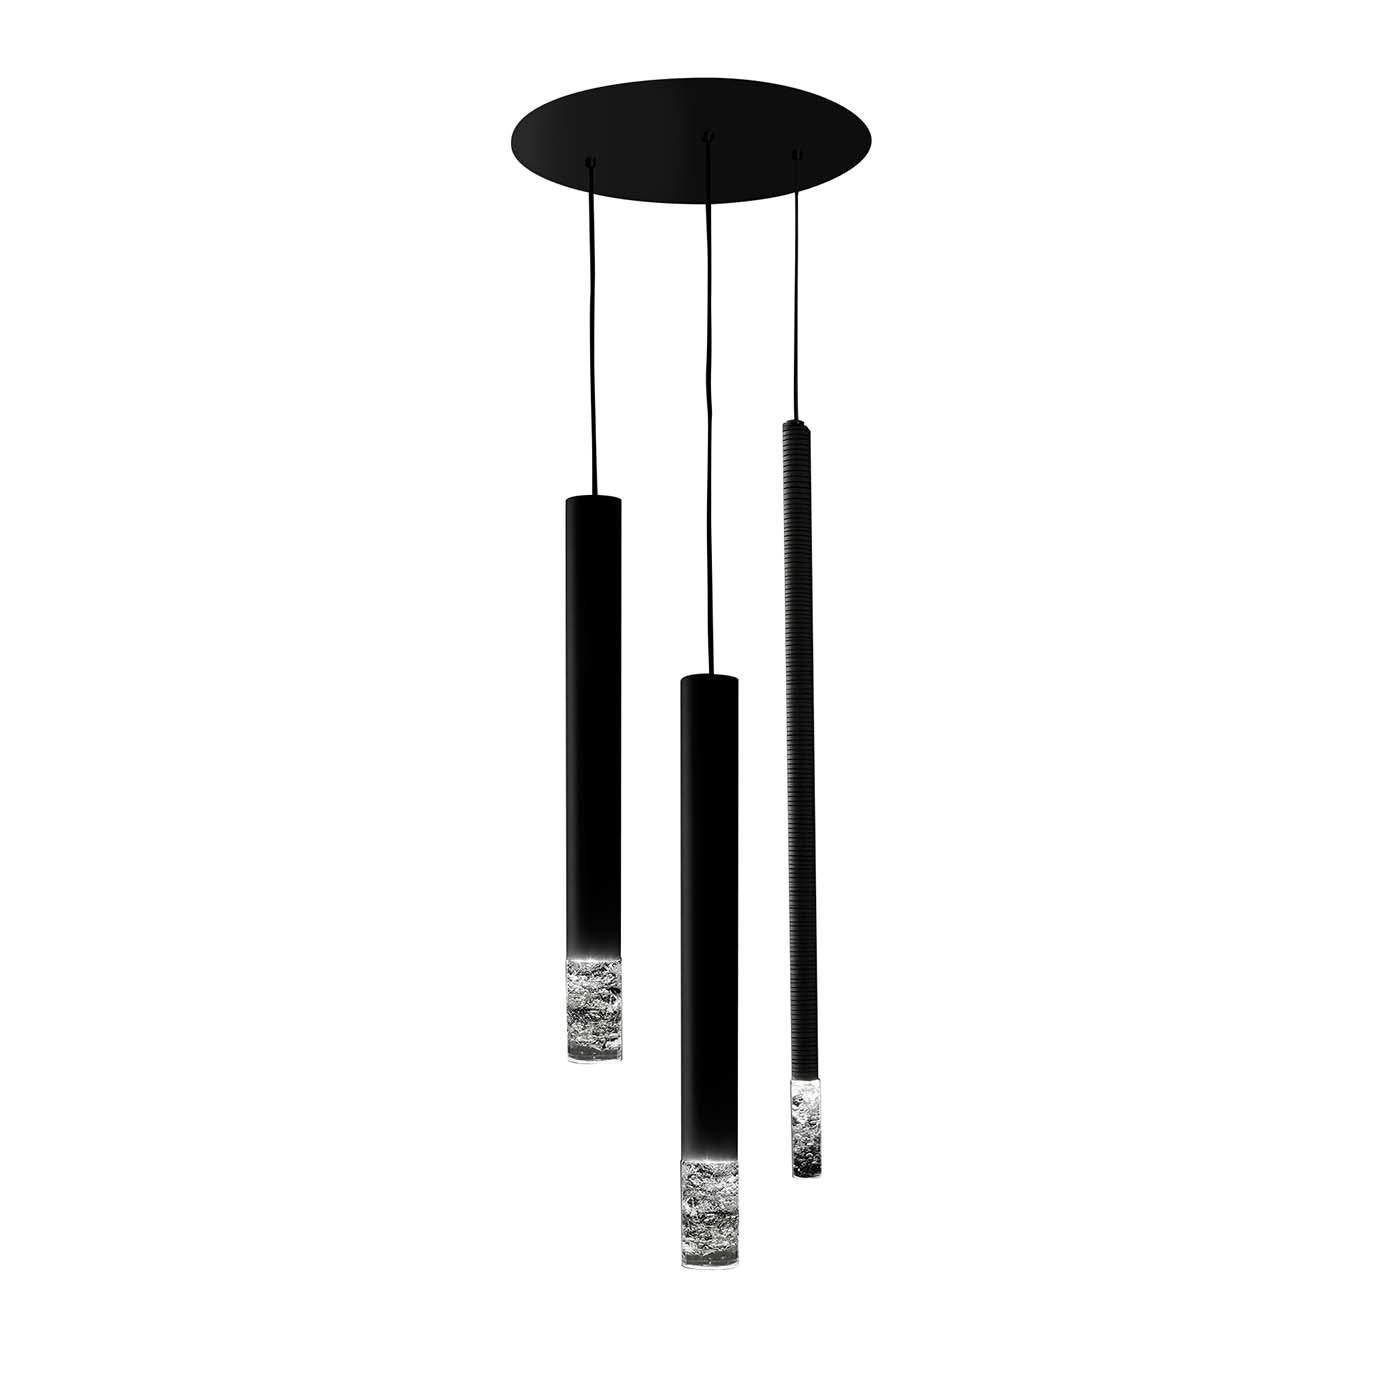 The Luh pendant lamp is a contemporary lighting solution that couples function with design harmony. Suspended at staggered heights from a black round metal ceiling plate, two Ubo and one Stillo Rings pendants form a stunning composition. All three